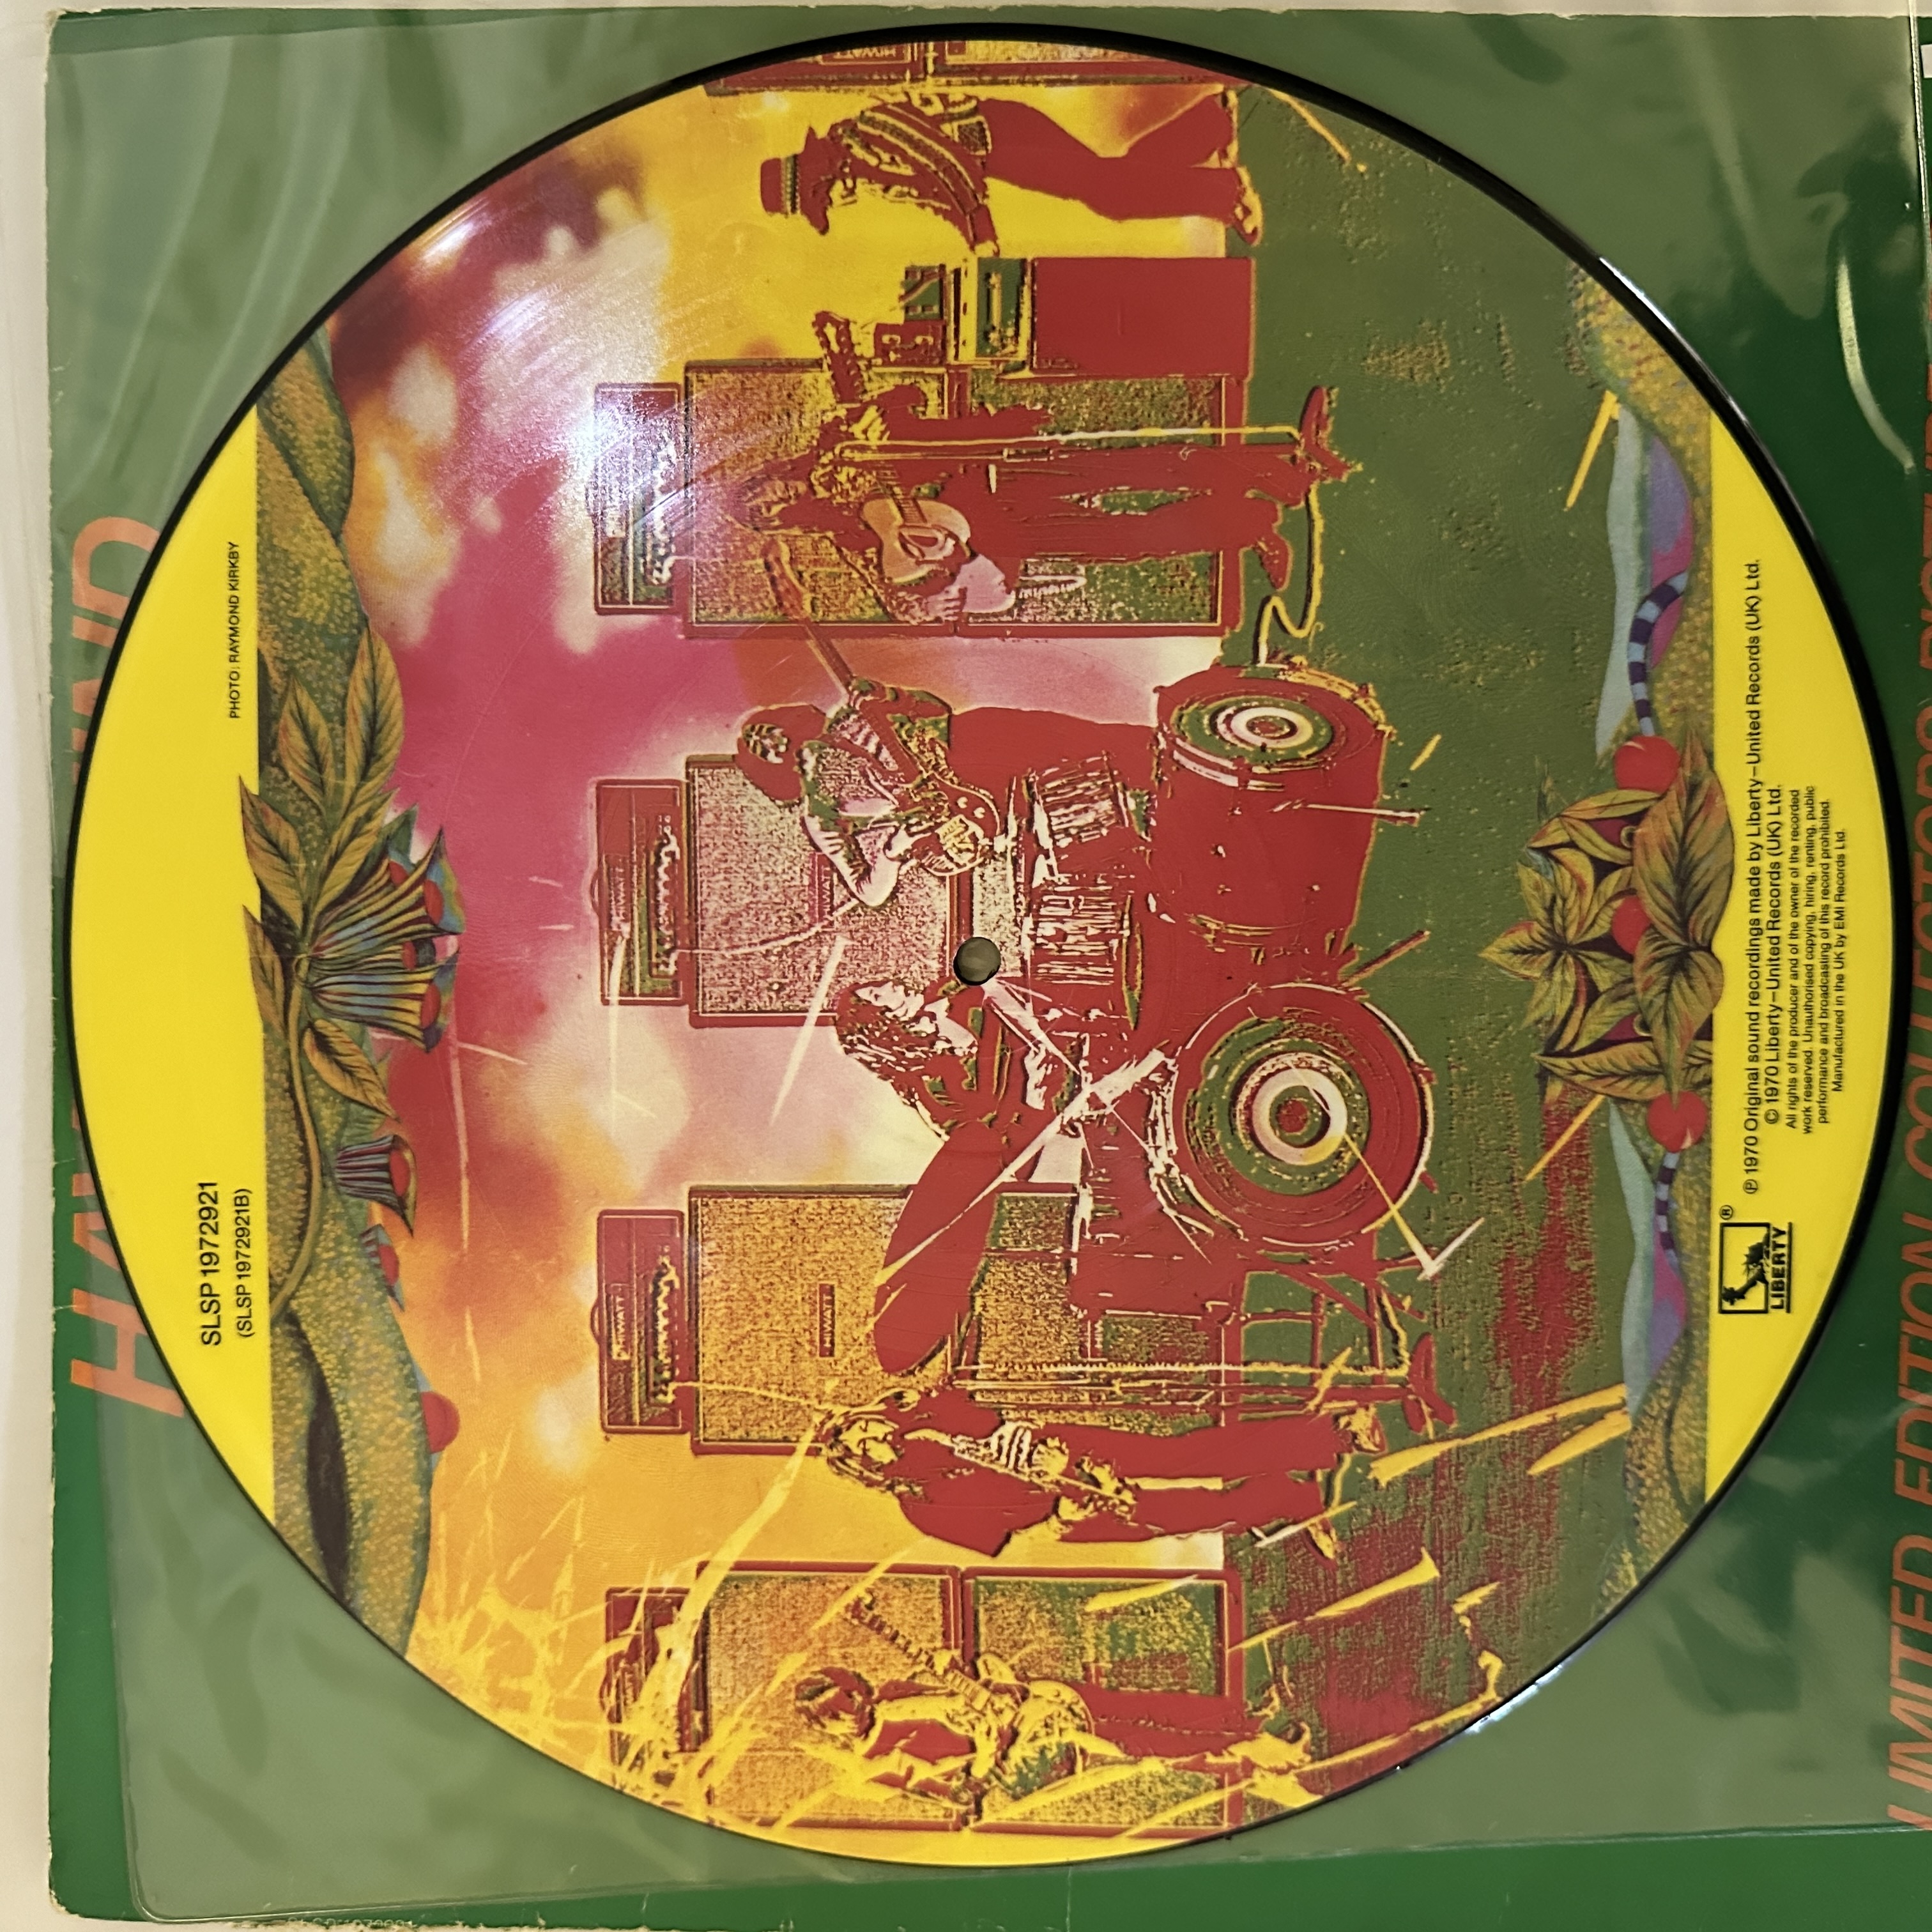 Hawkwind limited edition picture disc - Image 7 of 8